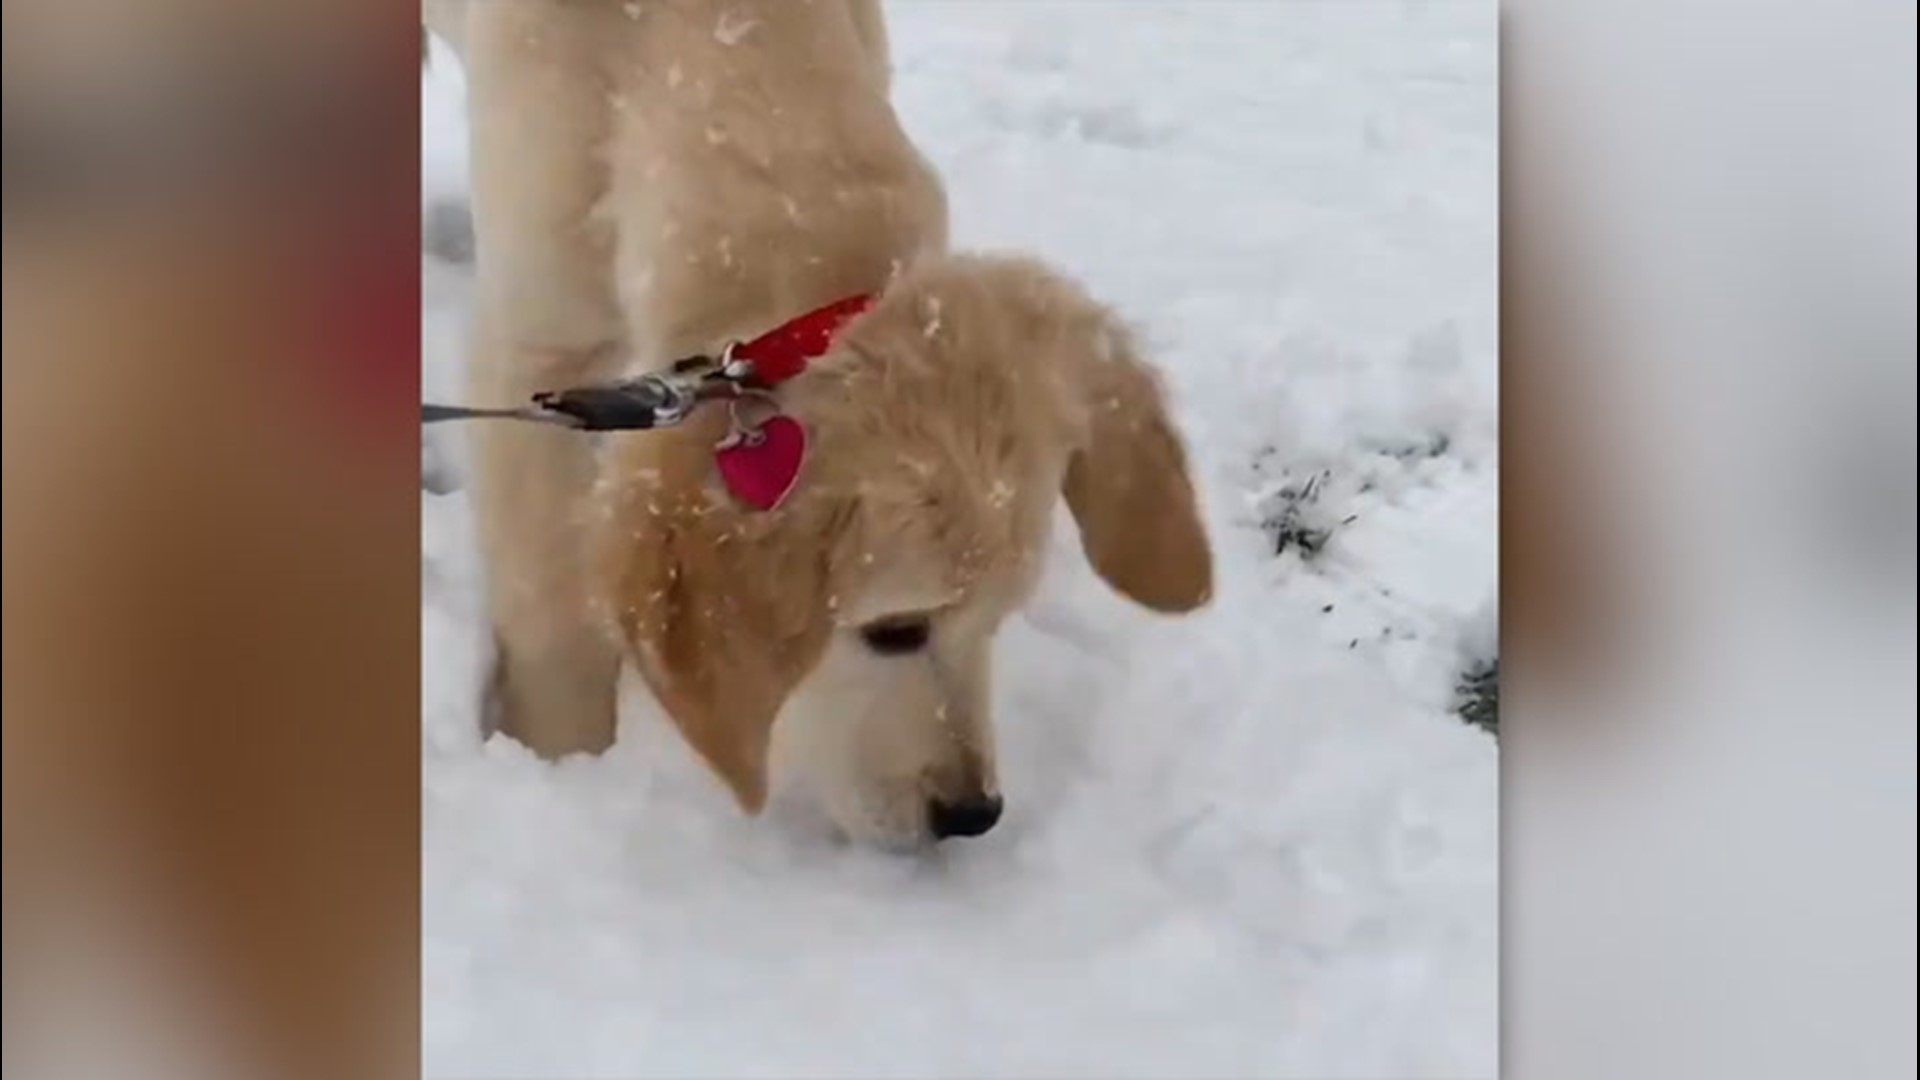 In Madison, Luna dashed through the fresh snow to greet her owner. In Cross Plains, Oscar experienced snow for the first time and immediately ate it. Both pups took full advantage of the new Wisconsin snow on Nov. 24.